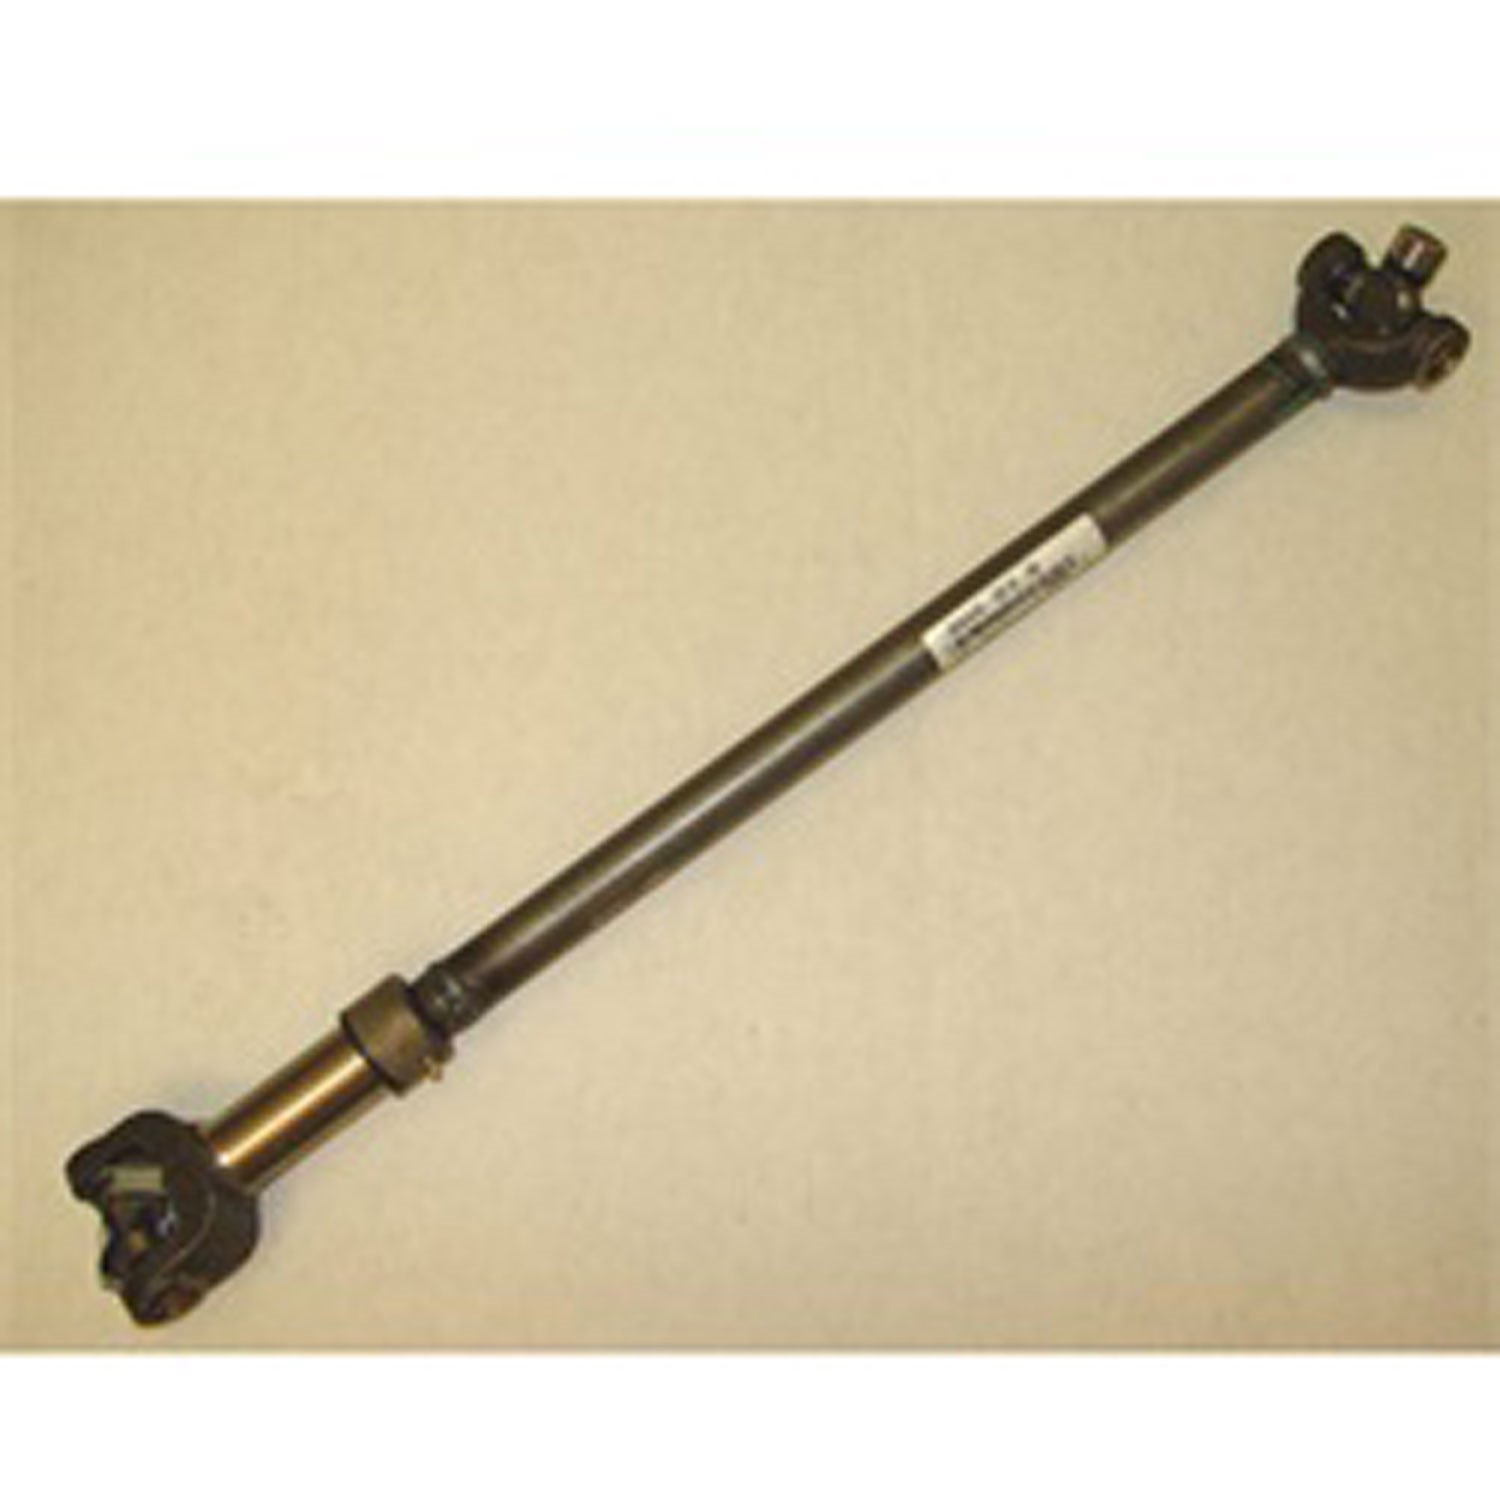 Stock replacement front driveshaft from Omix-ADA, Fits 76-81